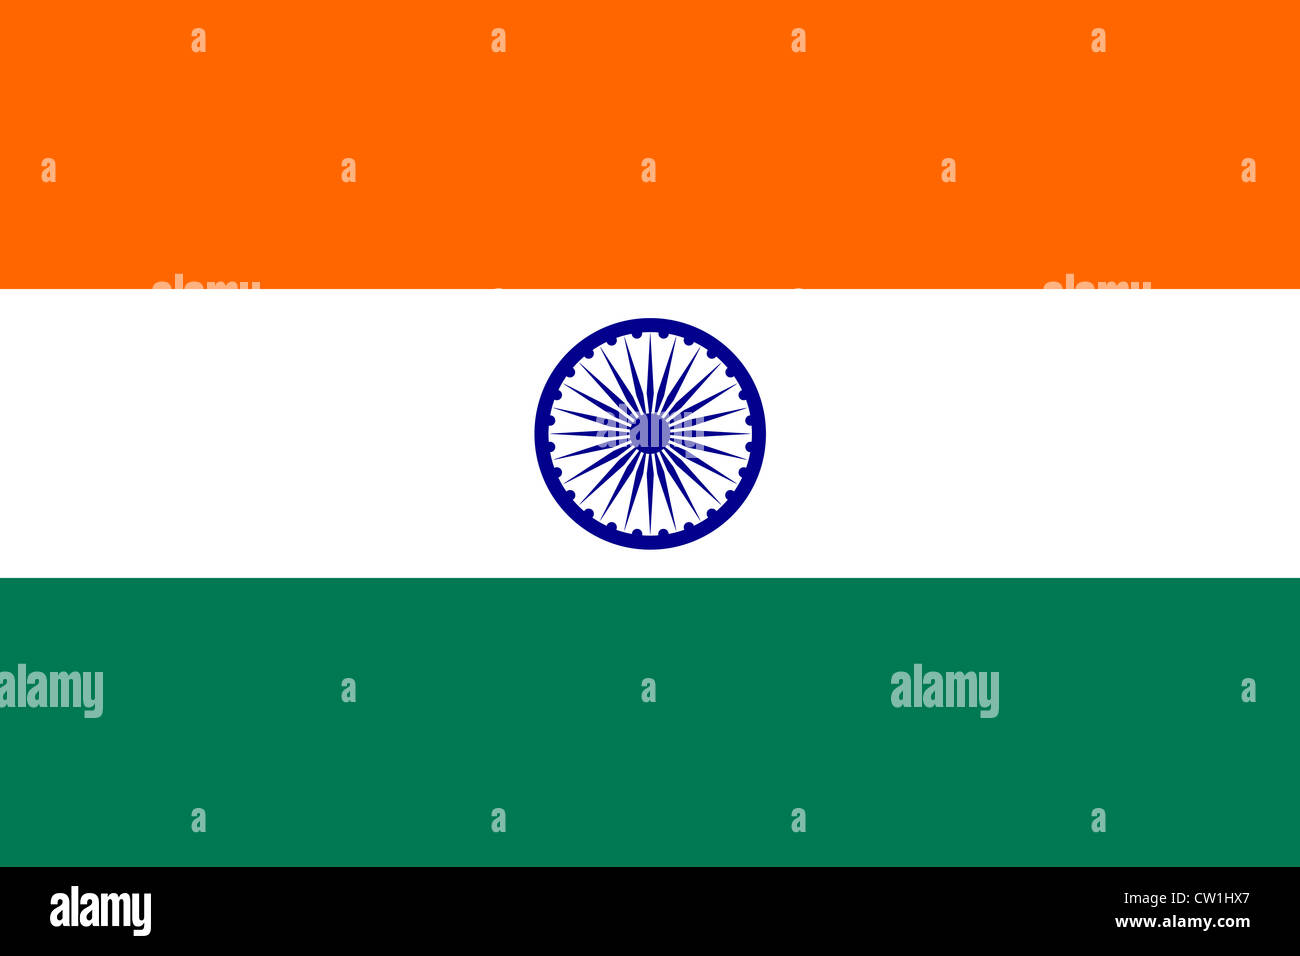 Flagge Indiens Stockfoto